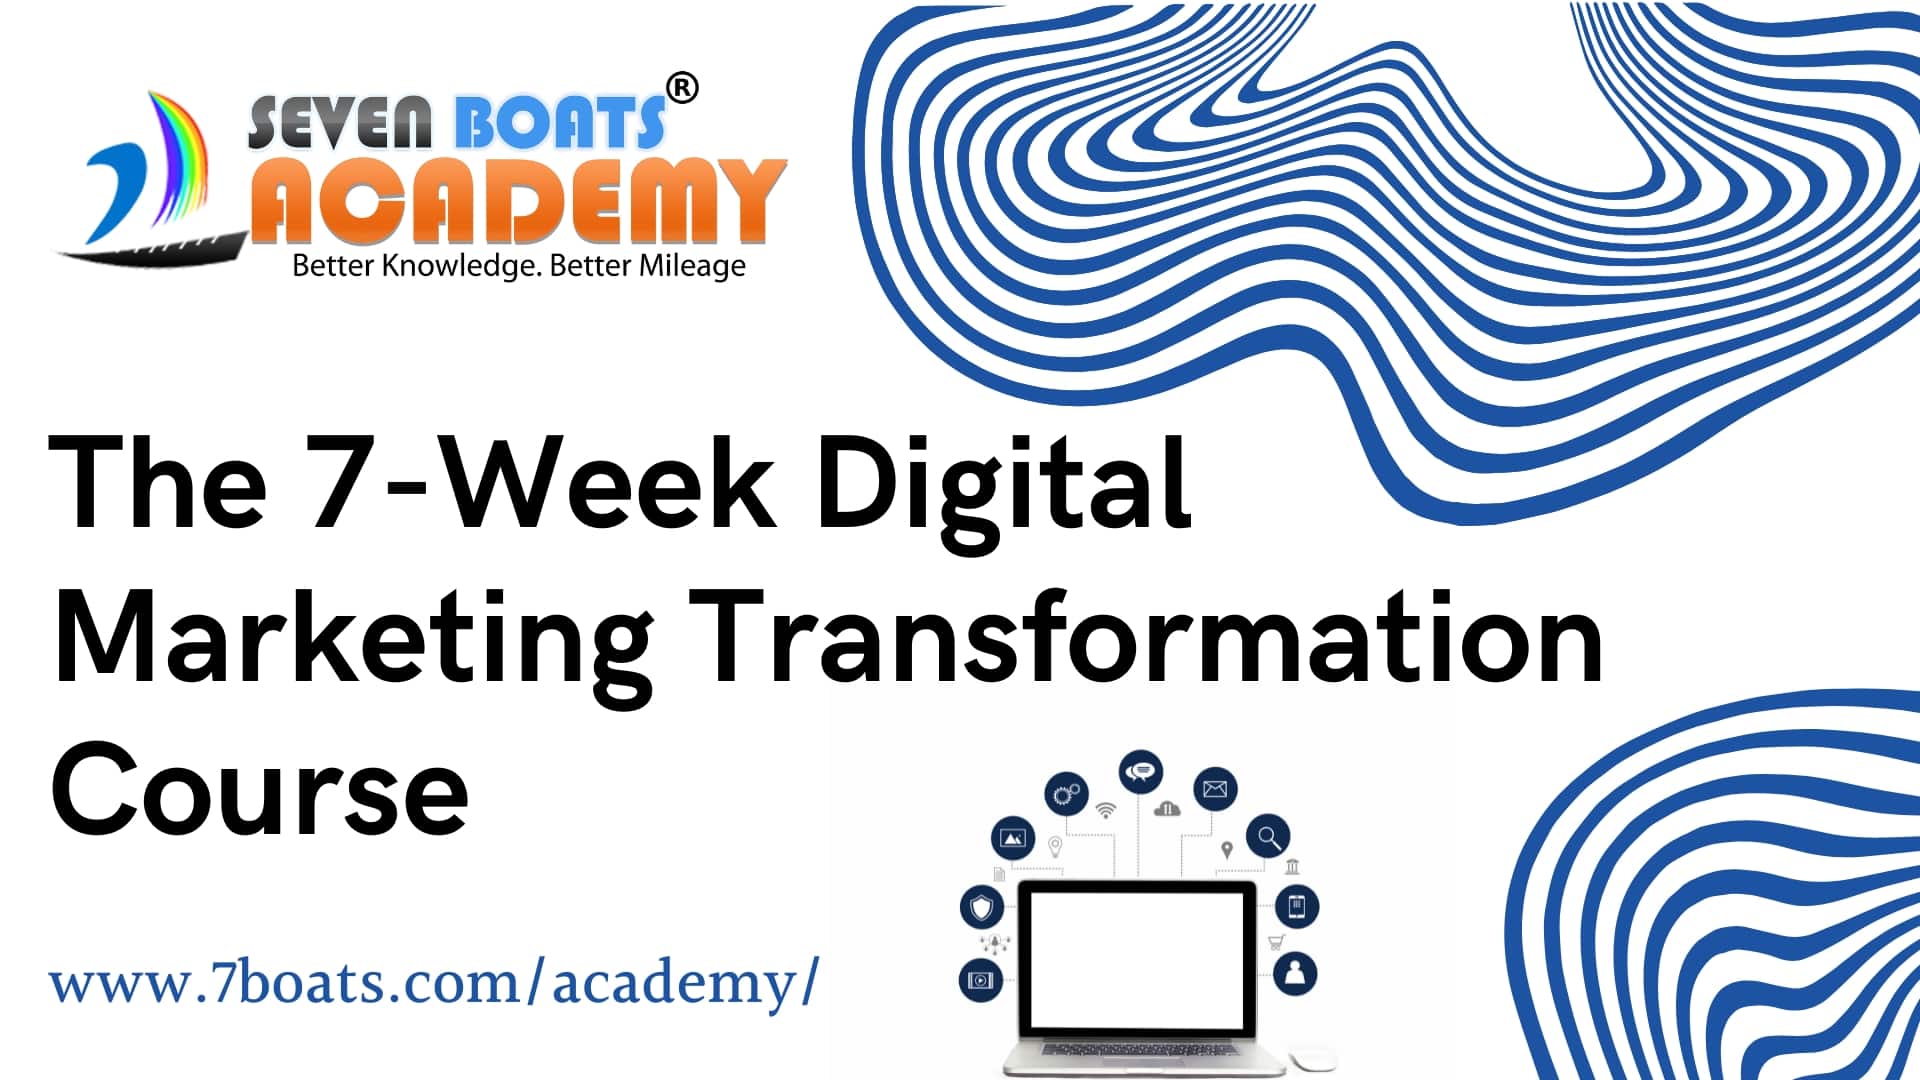 The 7-Week Digital Marketing Transformation Course at Seven Boats Academy